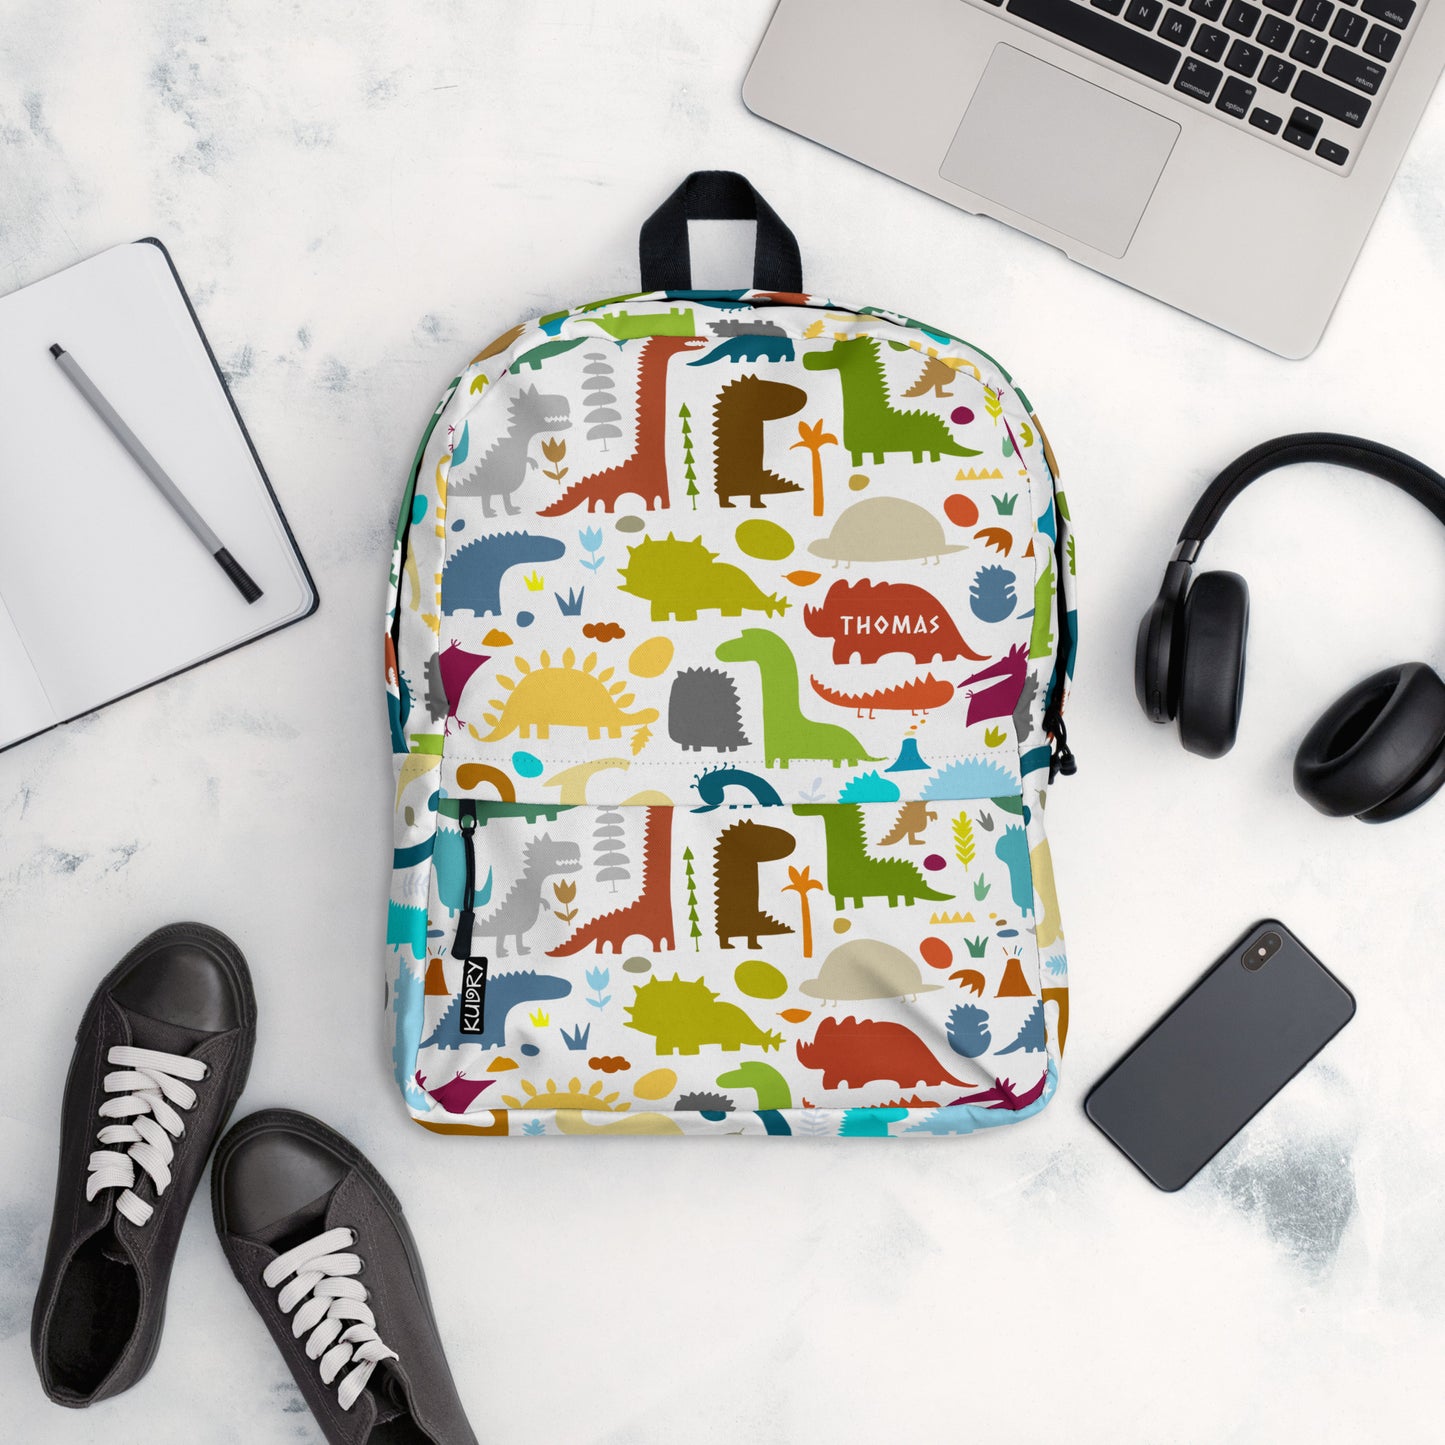 Paleontology Backpack white with colorful Dinosaurs designer print and personalised text. Top view